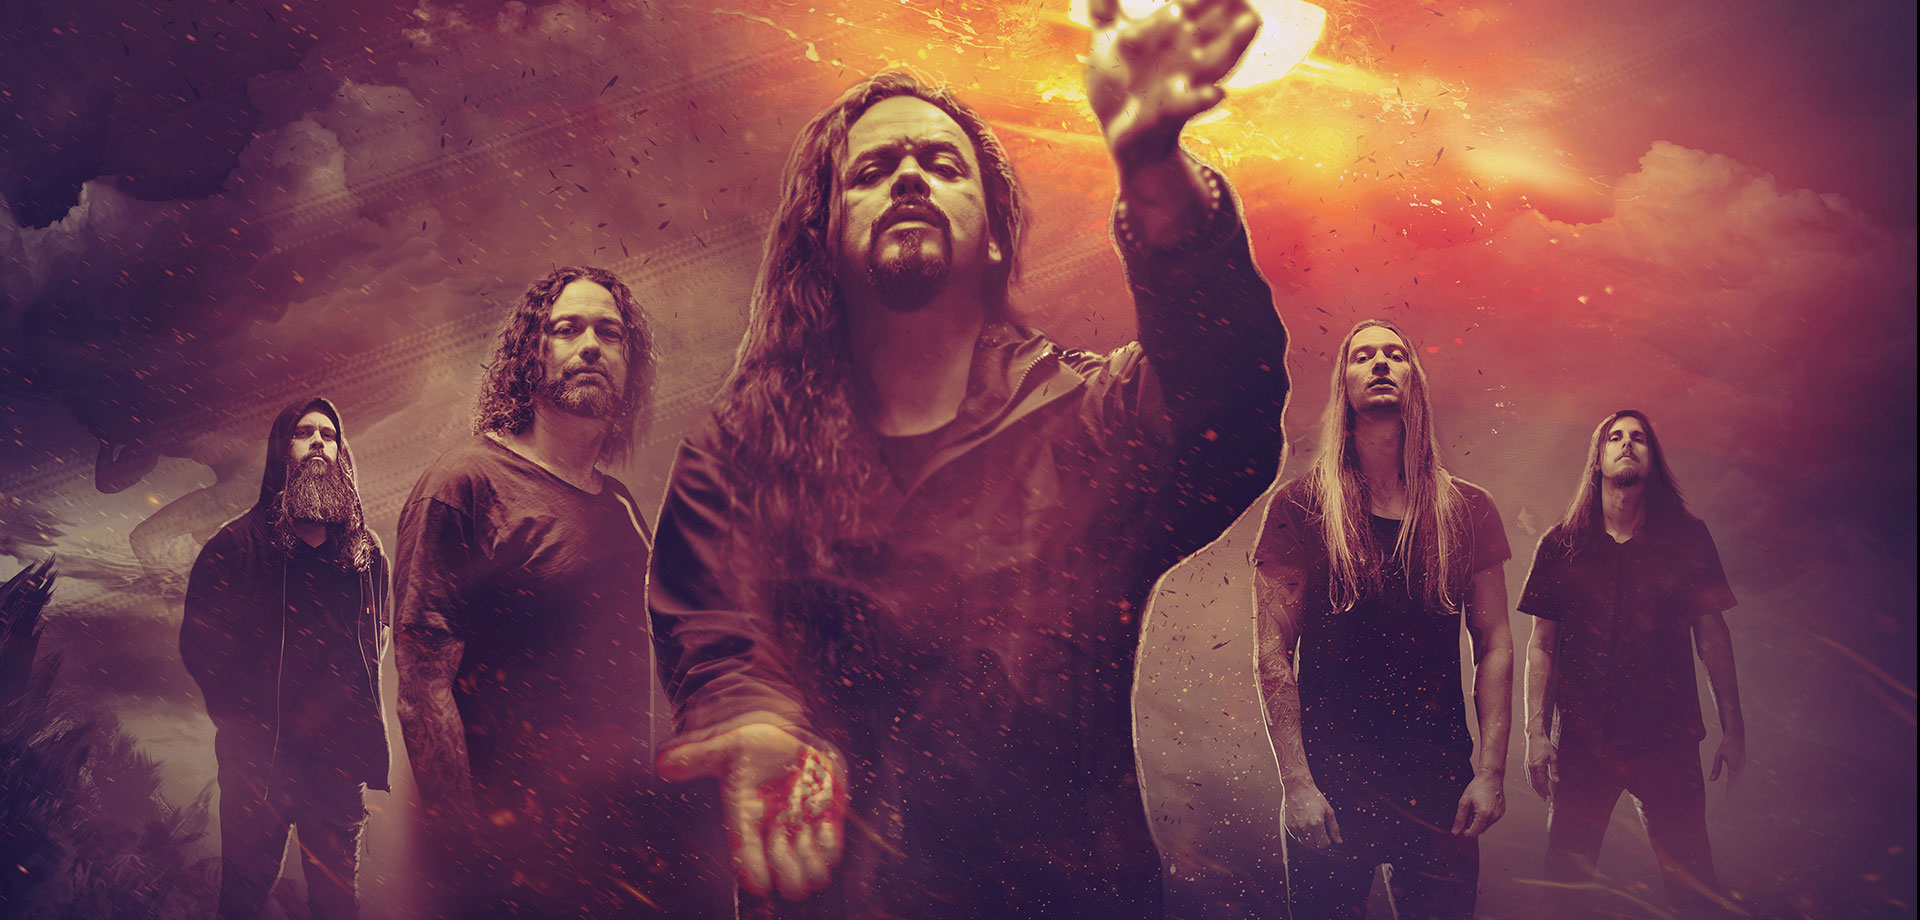 You are currently viewing EVERGREY Releases Music Video For “Eternal Nocturnal”.